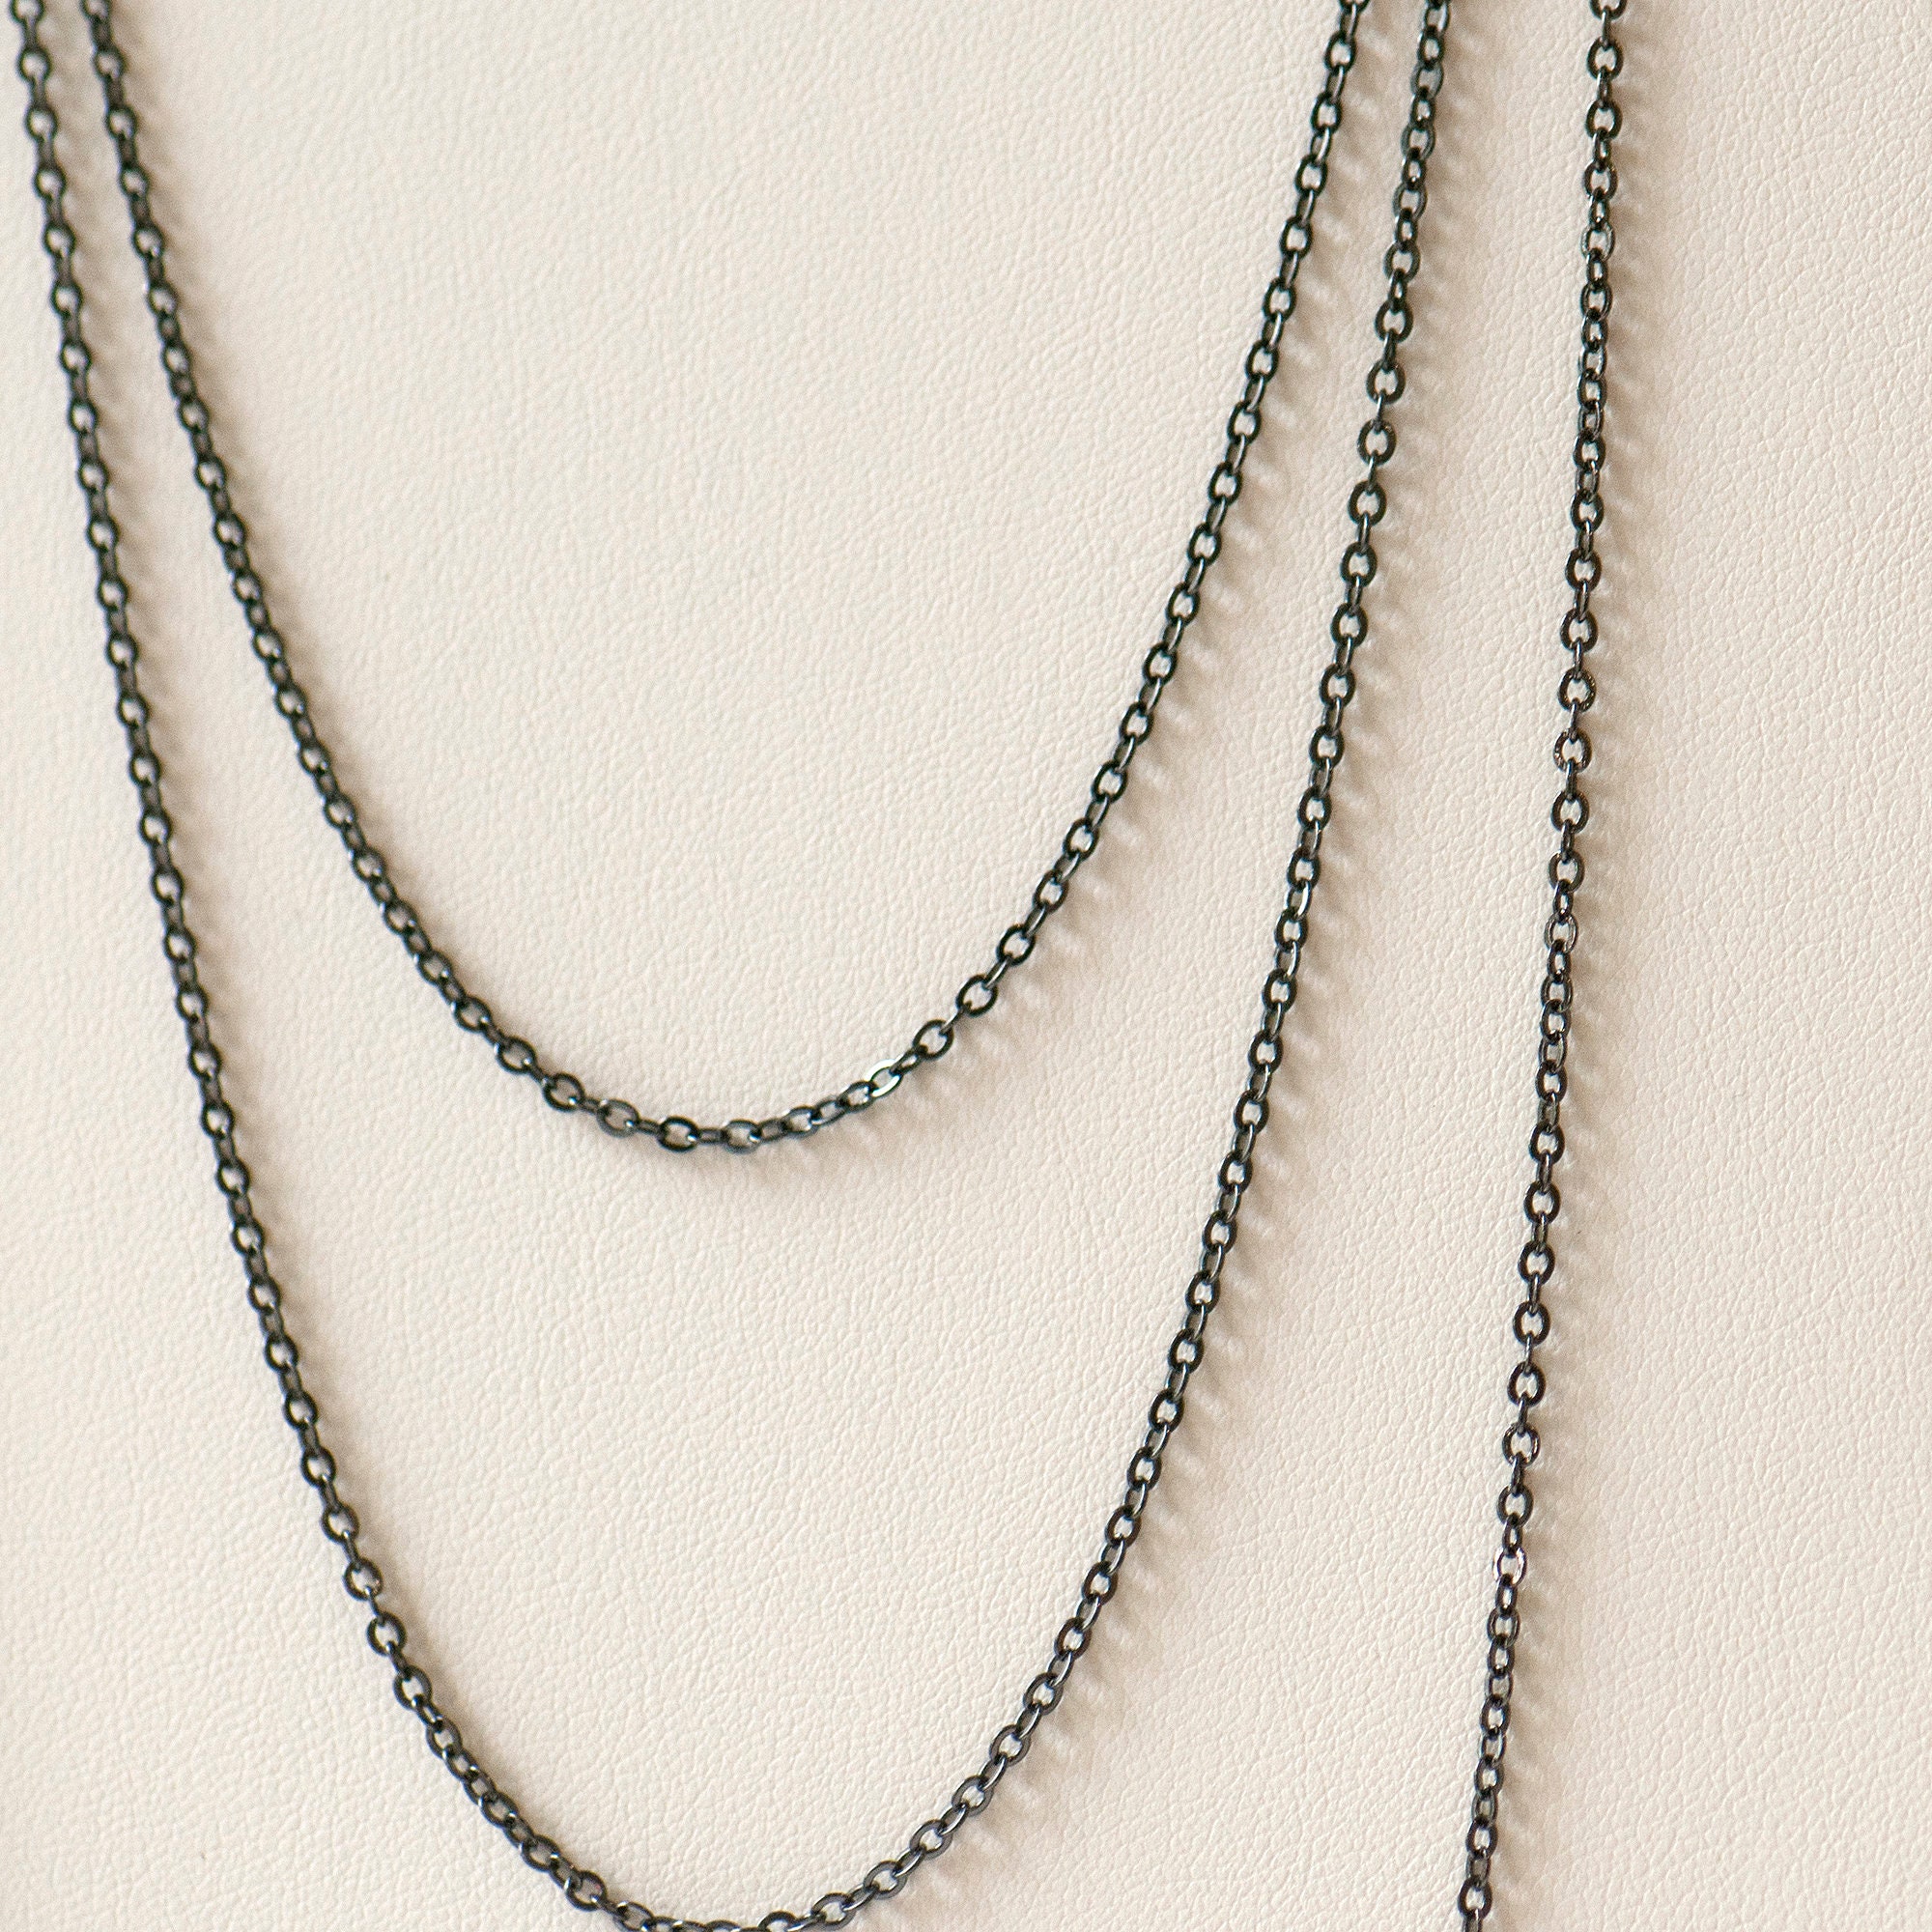 3mm Gold Chain Necklace, Short 16 20 Thin Choker Necklace Chain